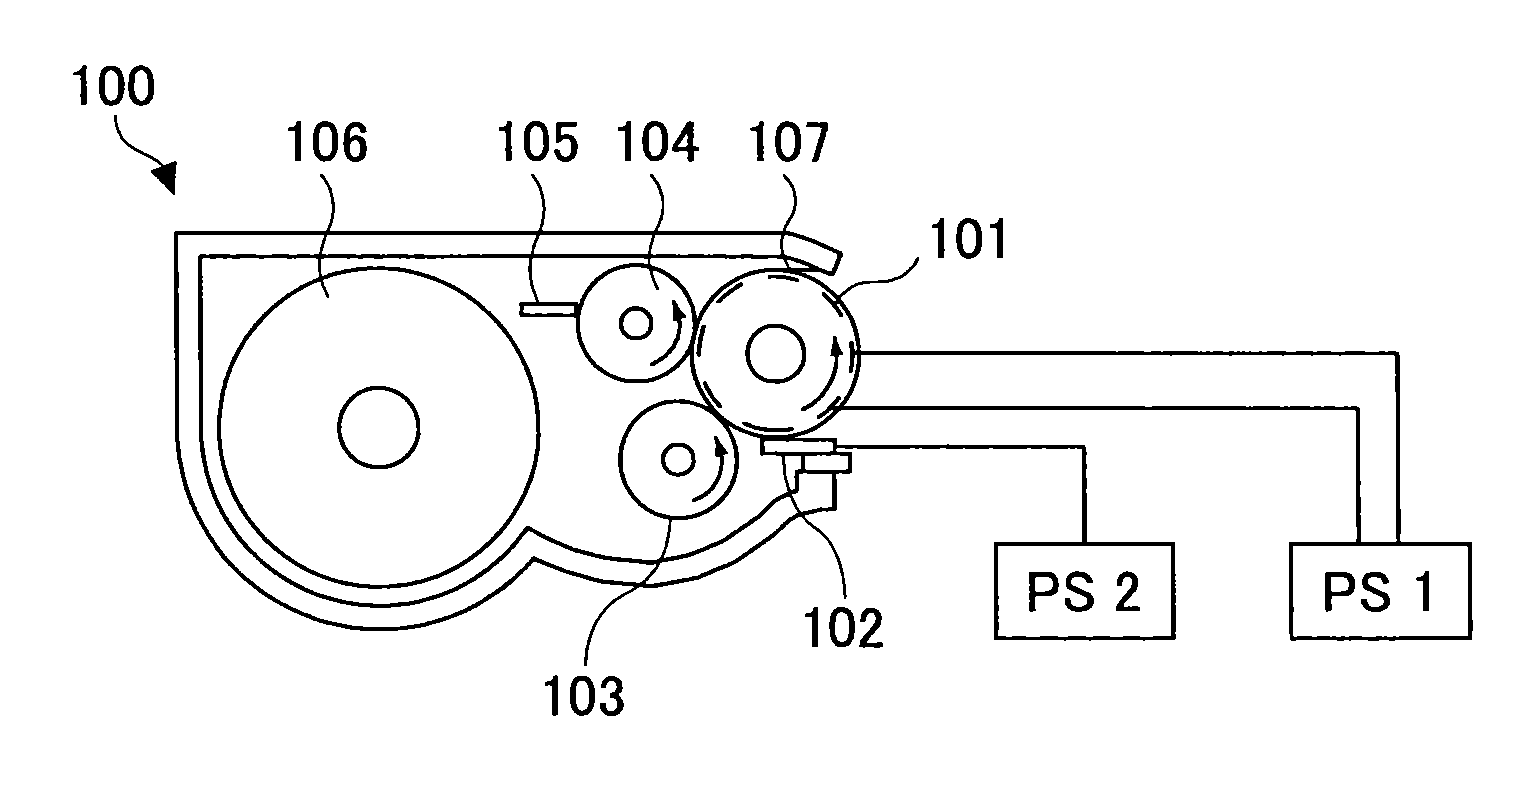 Developing apparatus, image forming apparatus, and process cartridge